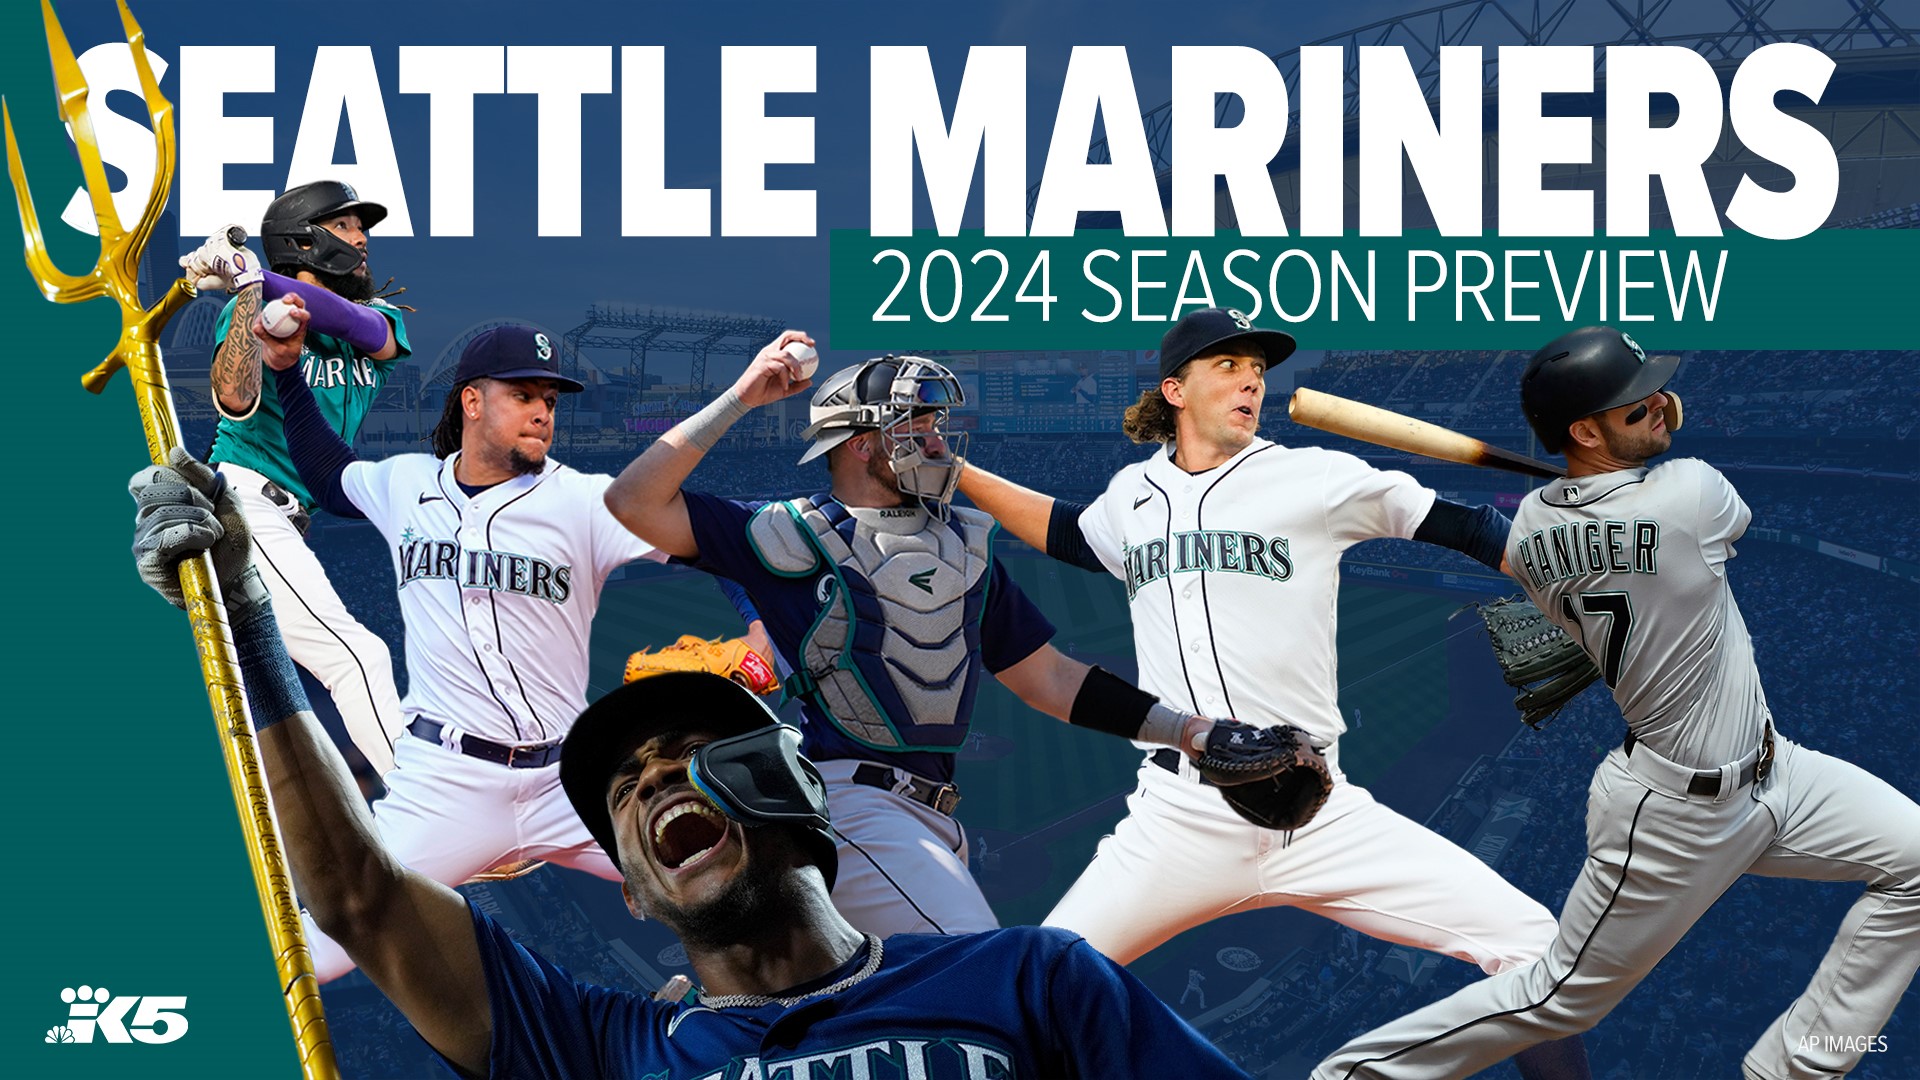 A look ahead at the 2024 baseball season for the Seattle Mariners